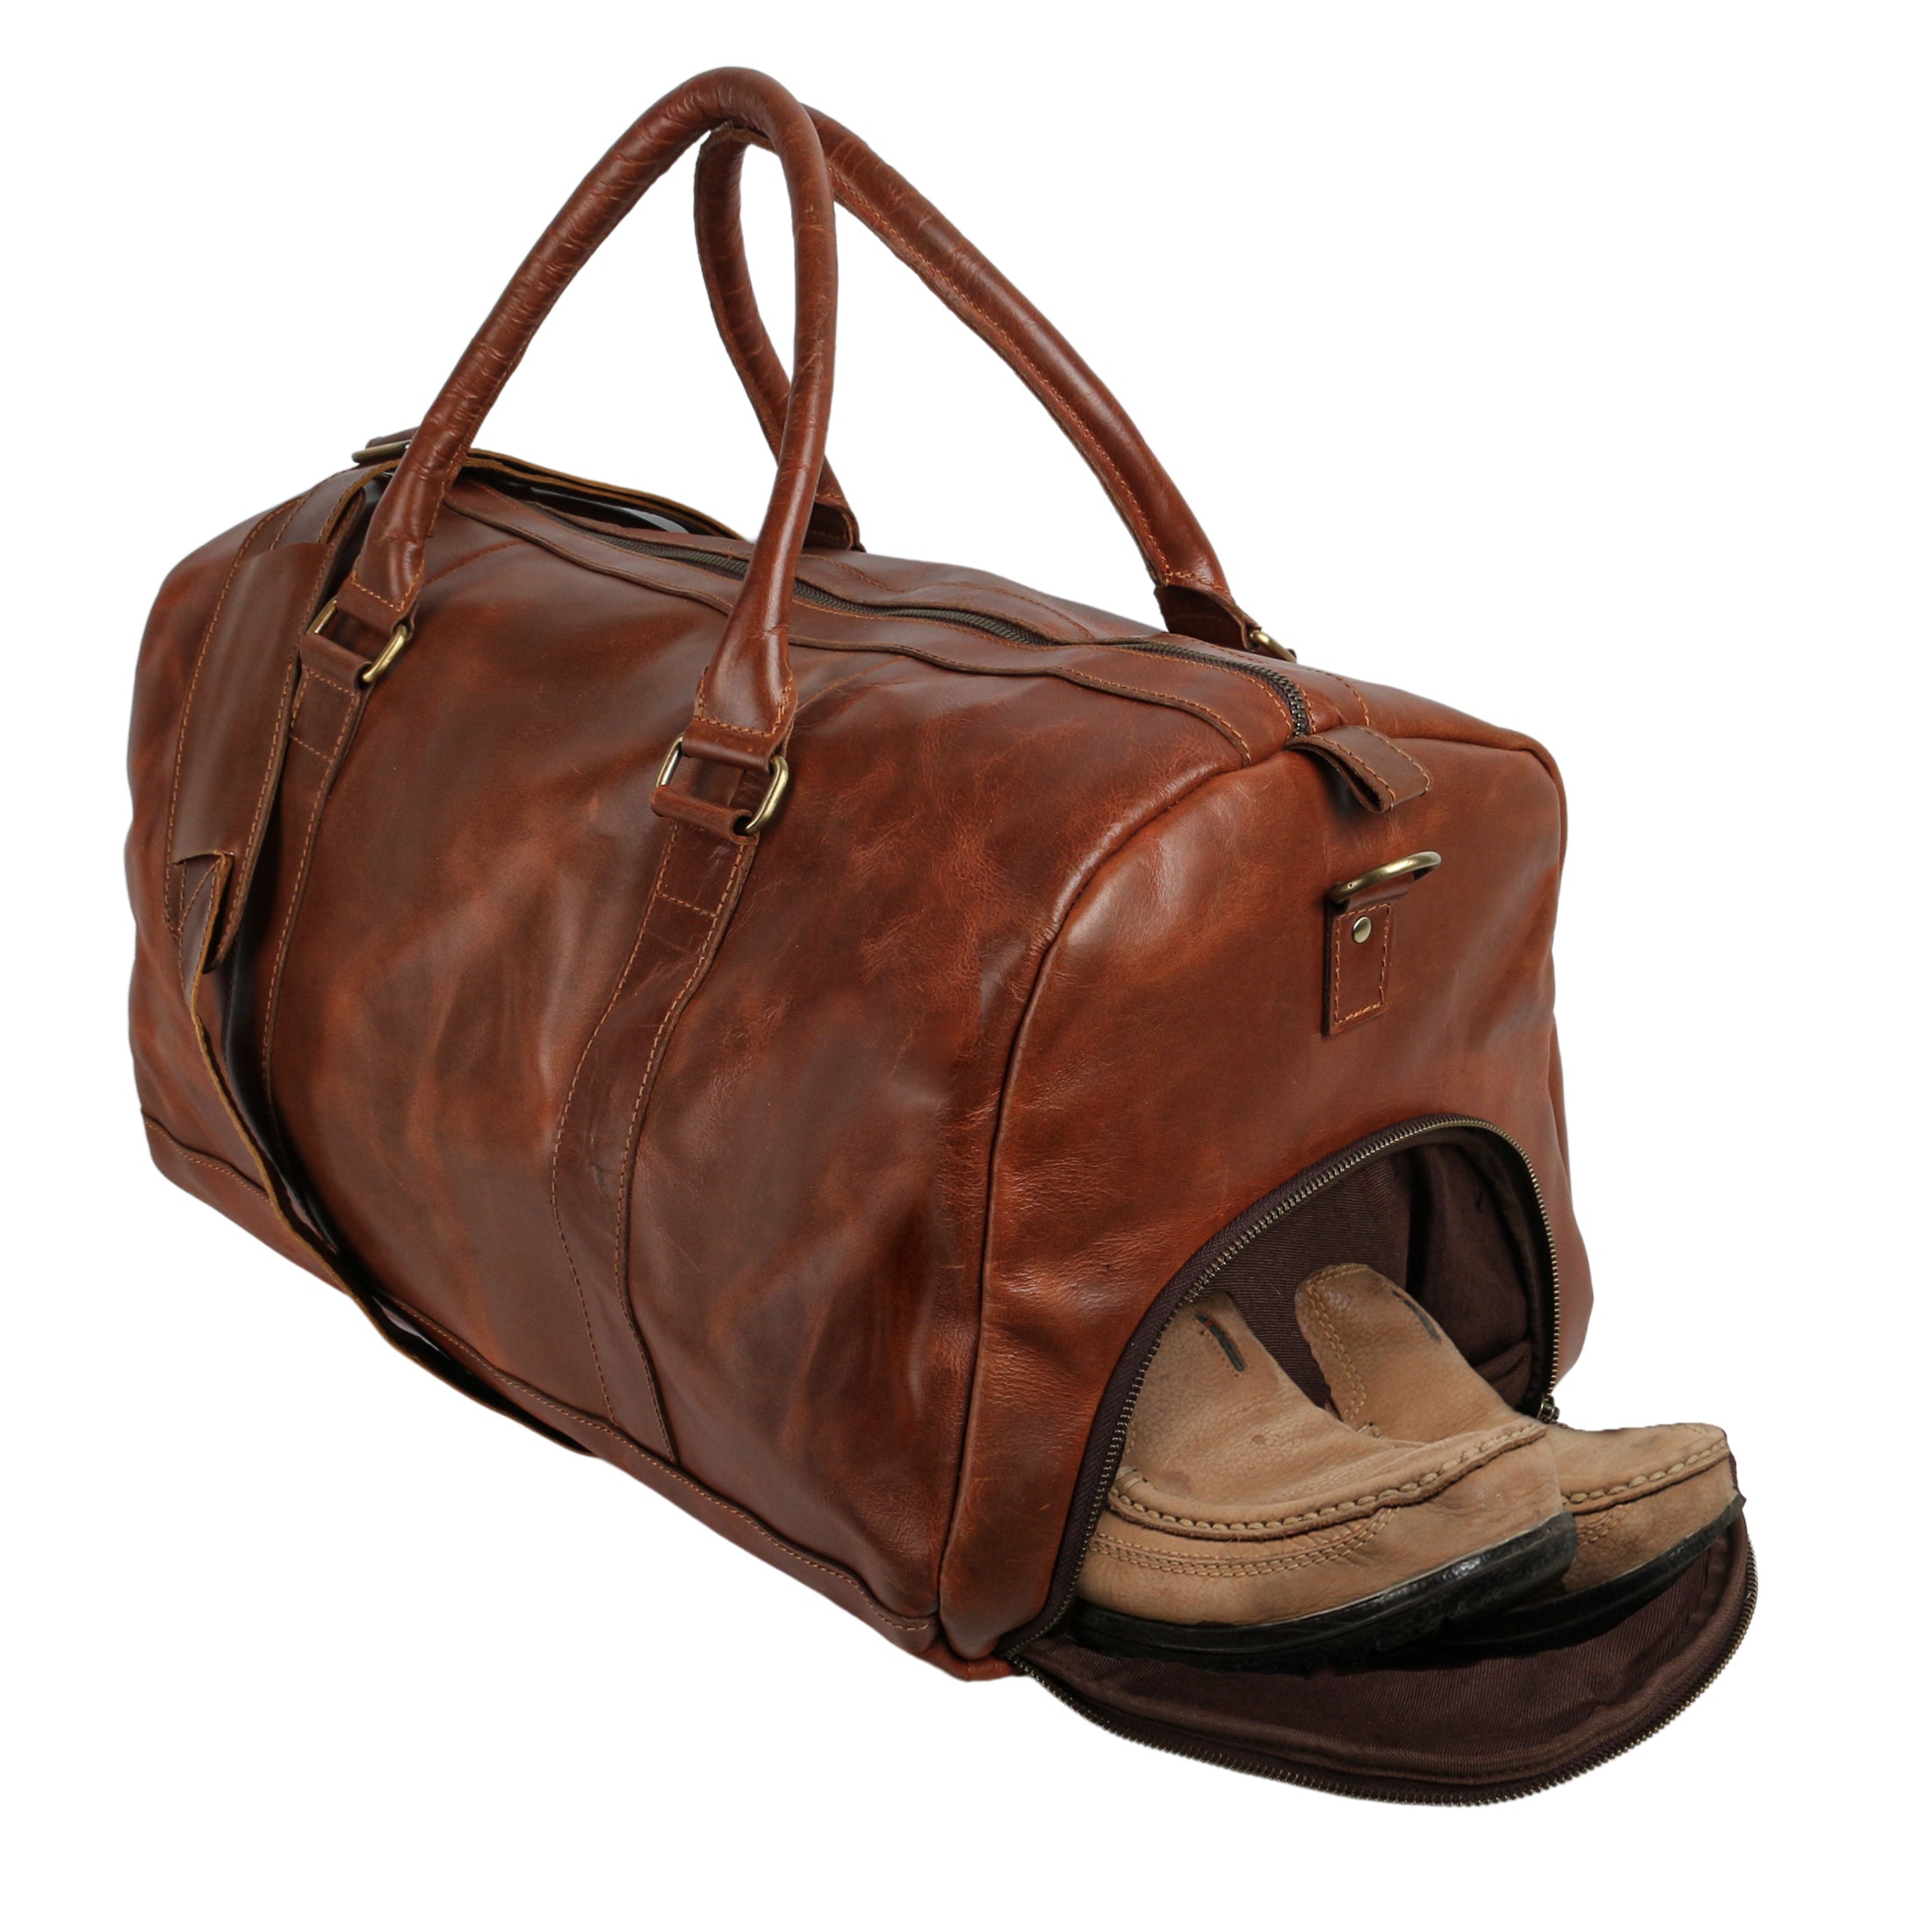 Leather Duffel Bags for Men and Women with Full Grain Travel